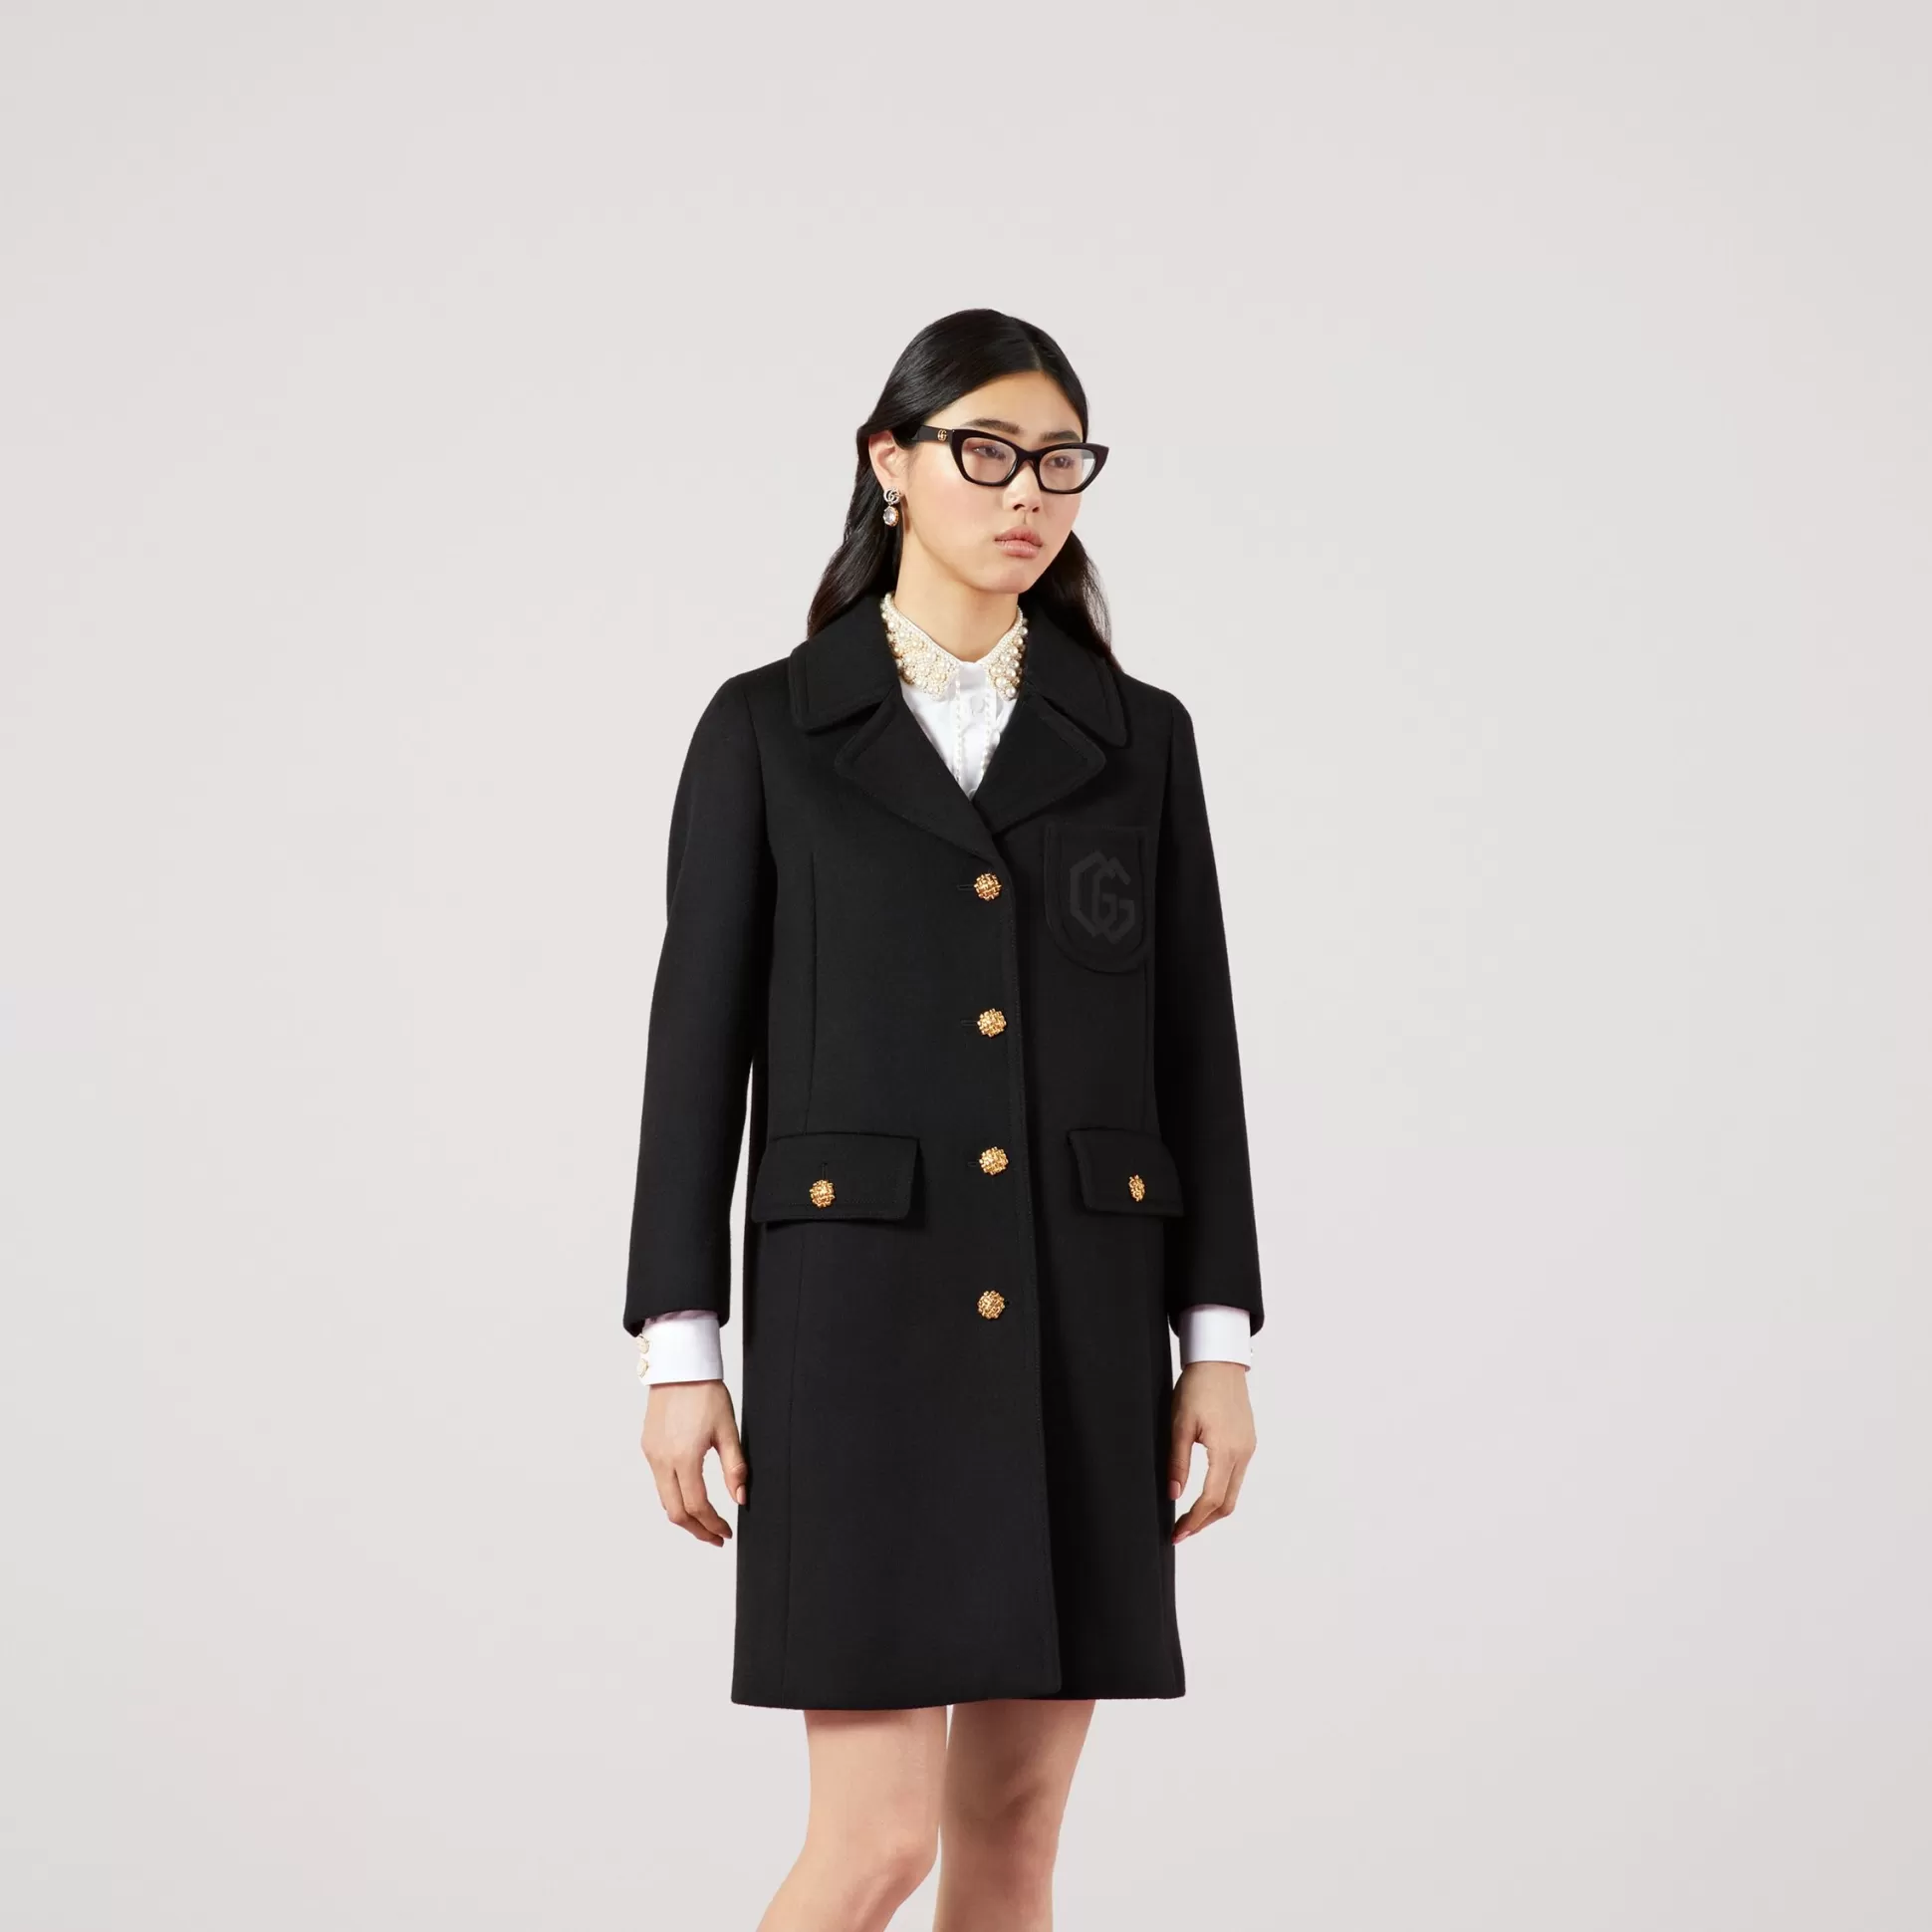 GUCCI Double G Embroidery Wool Coat-Women Coats & Jackets